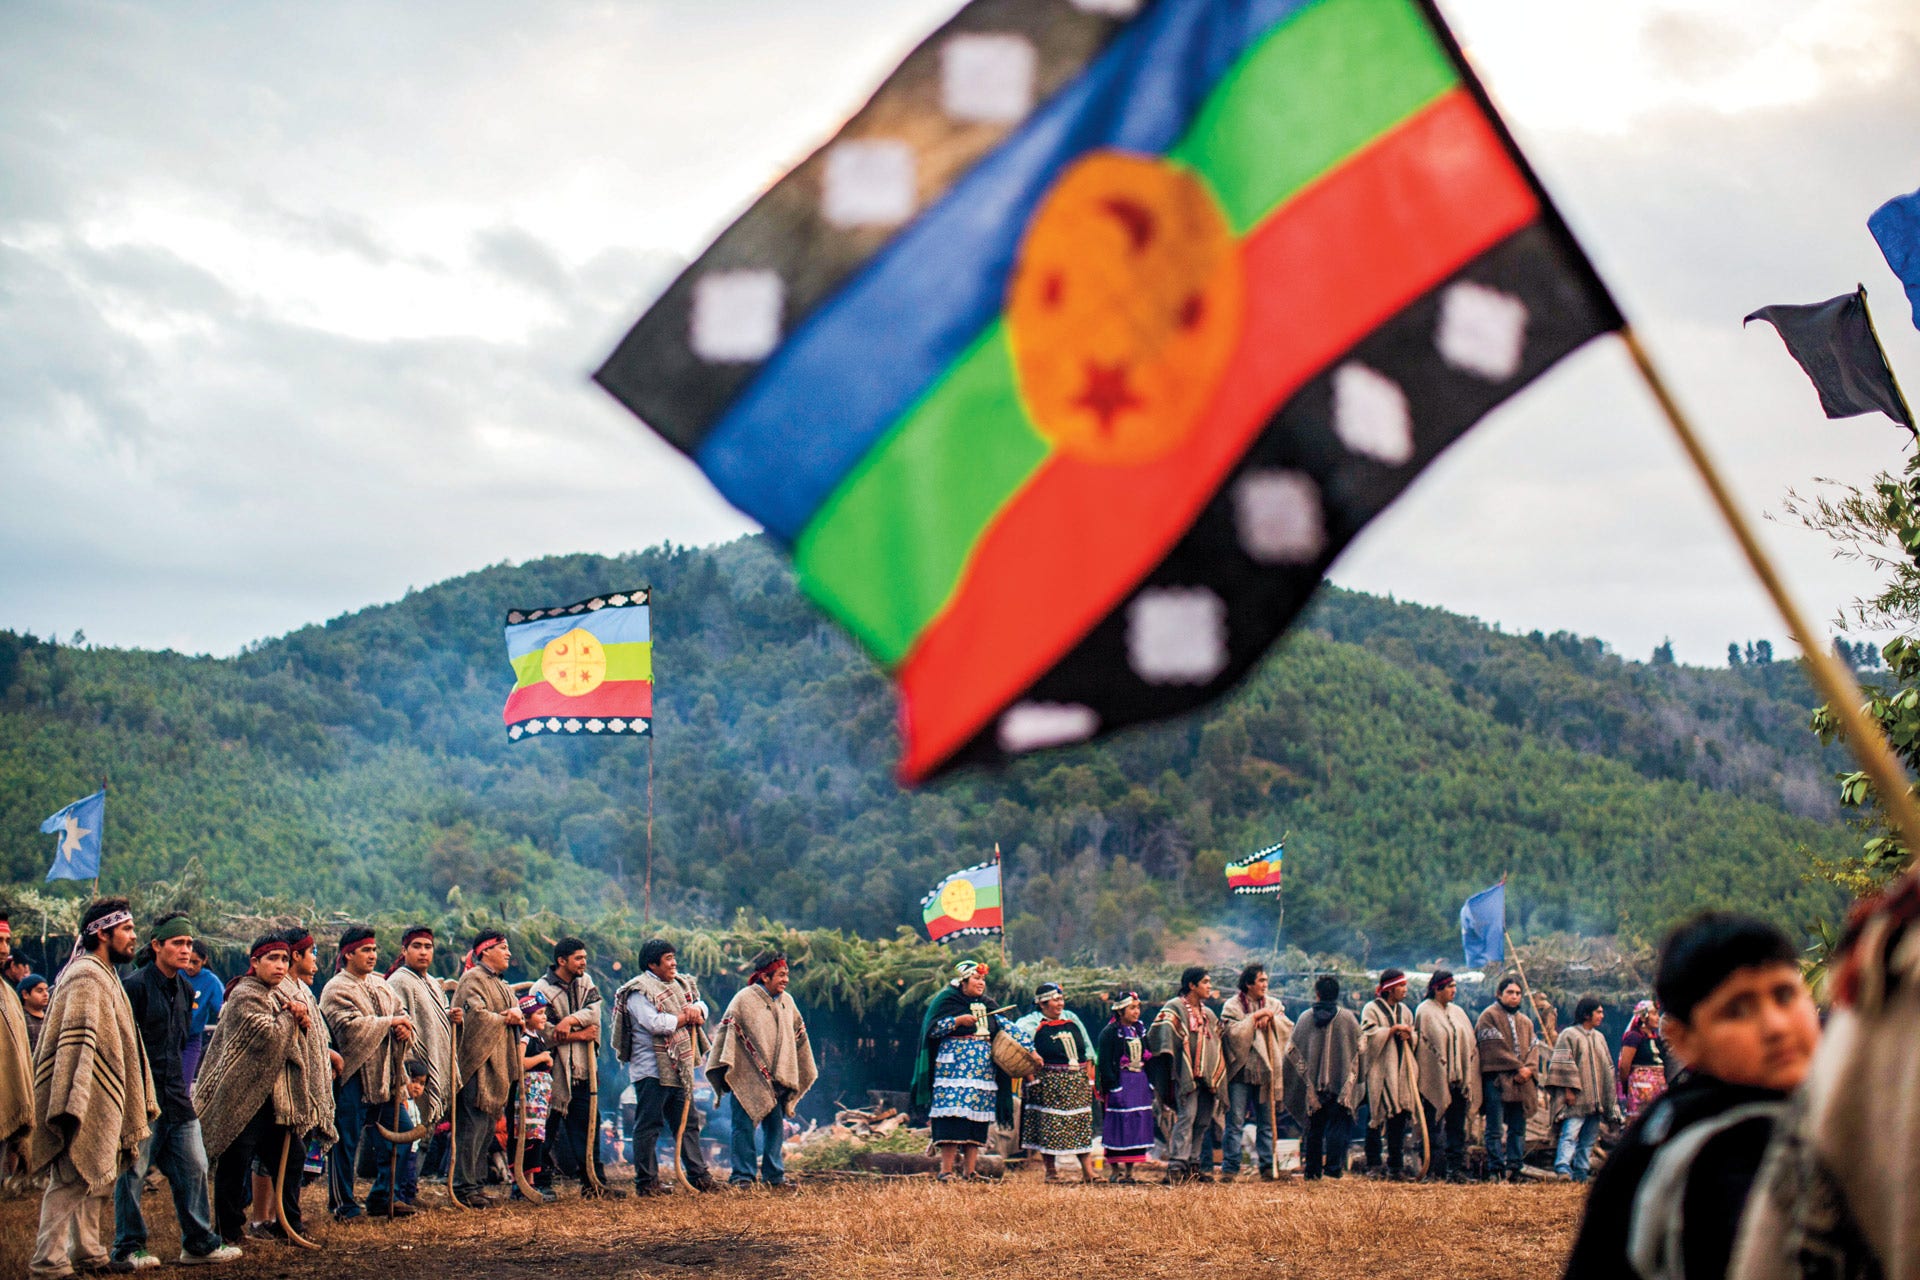 Indigenous Mapuche Indians attend a spiritual community gathering in Ercilla, Chile